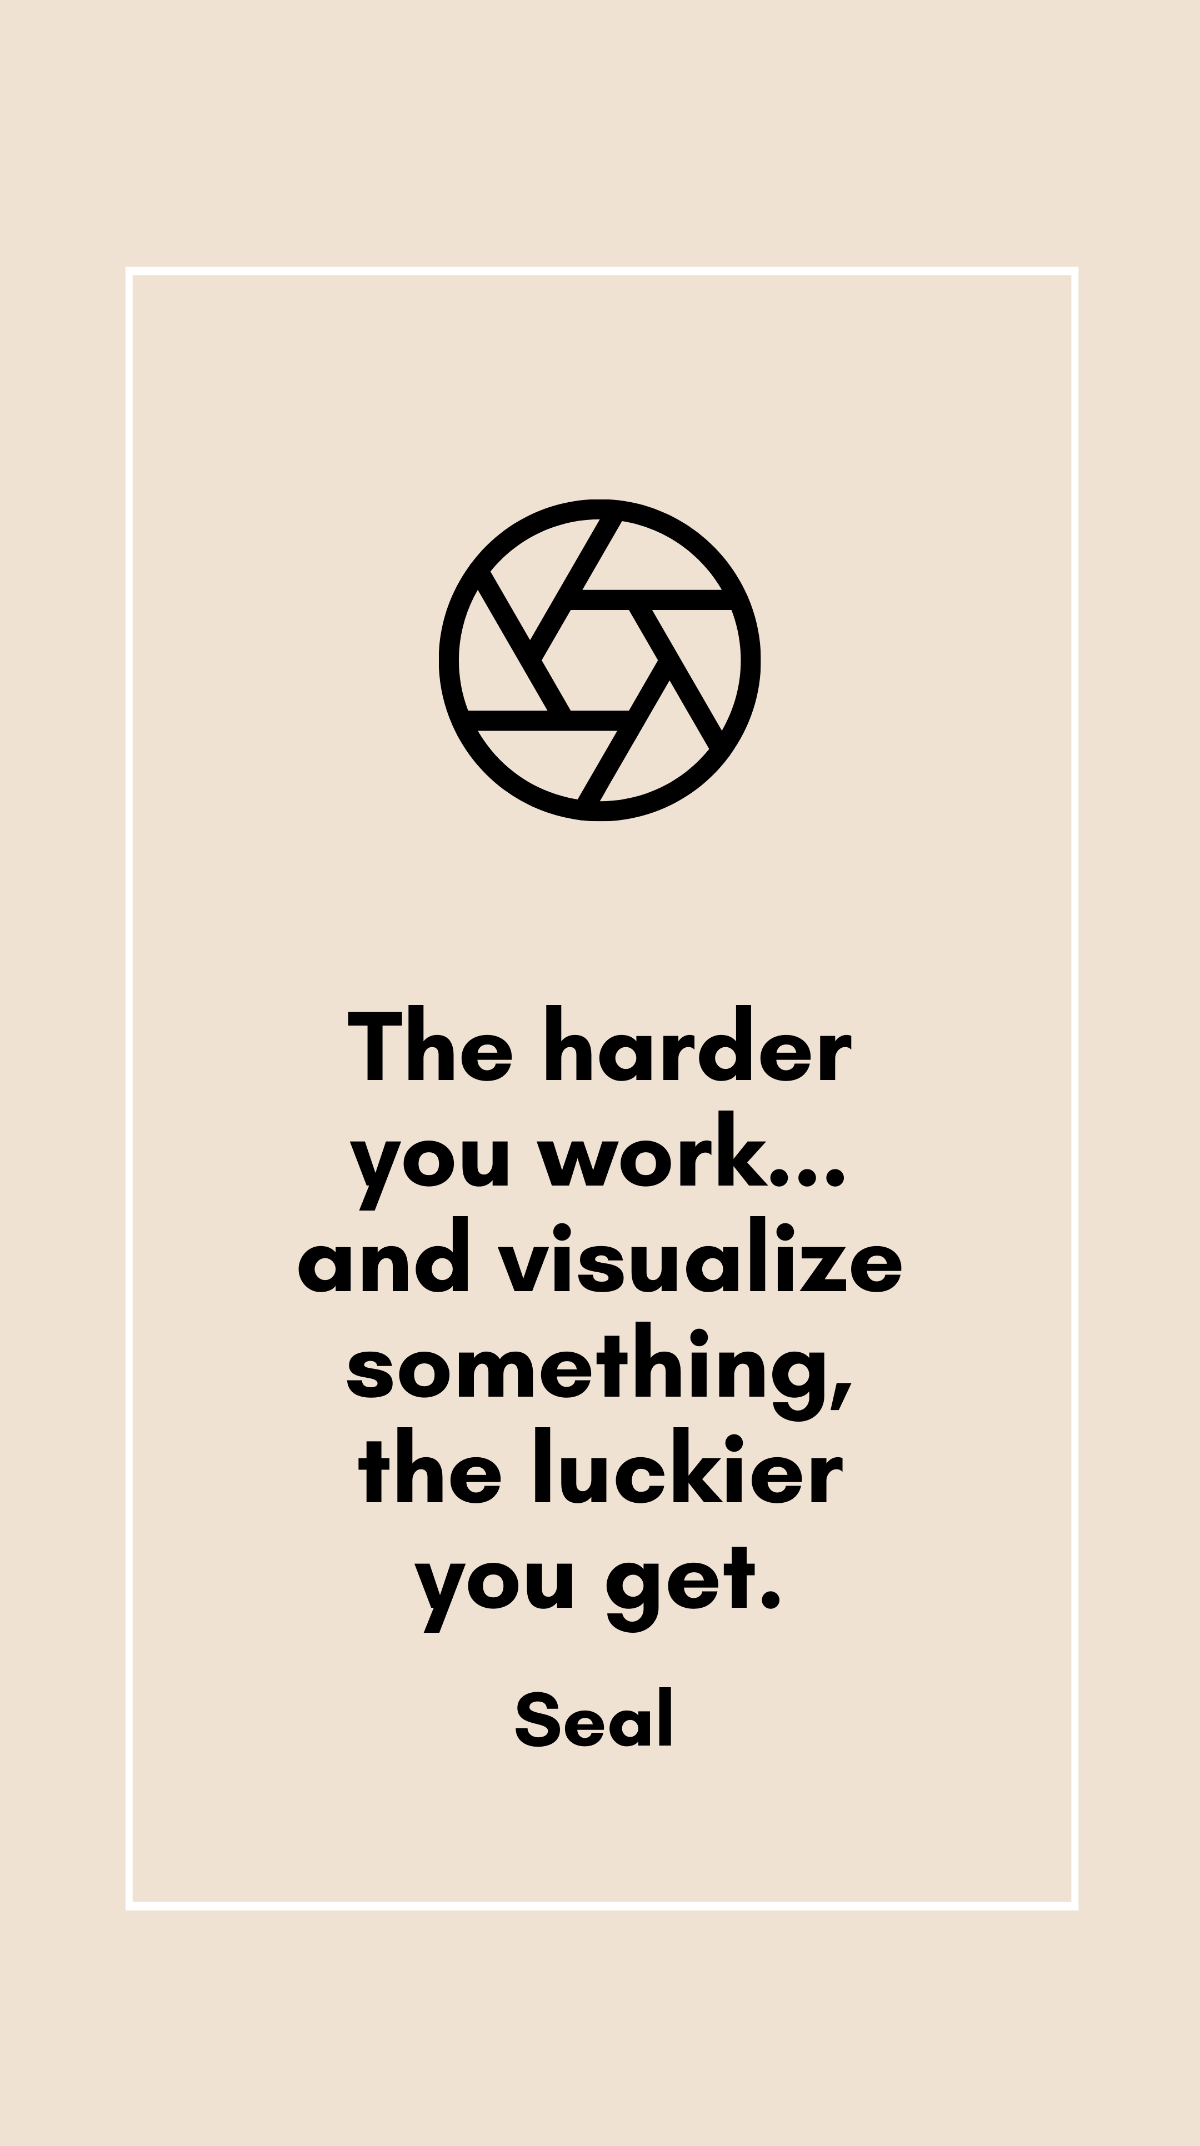 Free Seal - The harder you work... and visualize something, the luckier you get. Template